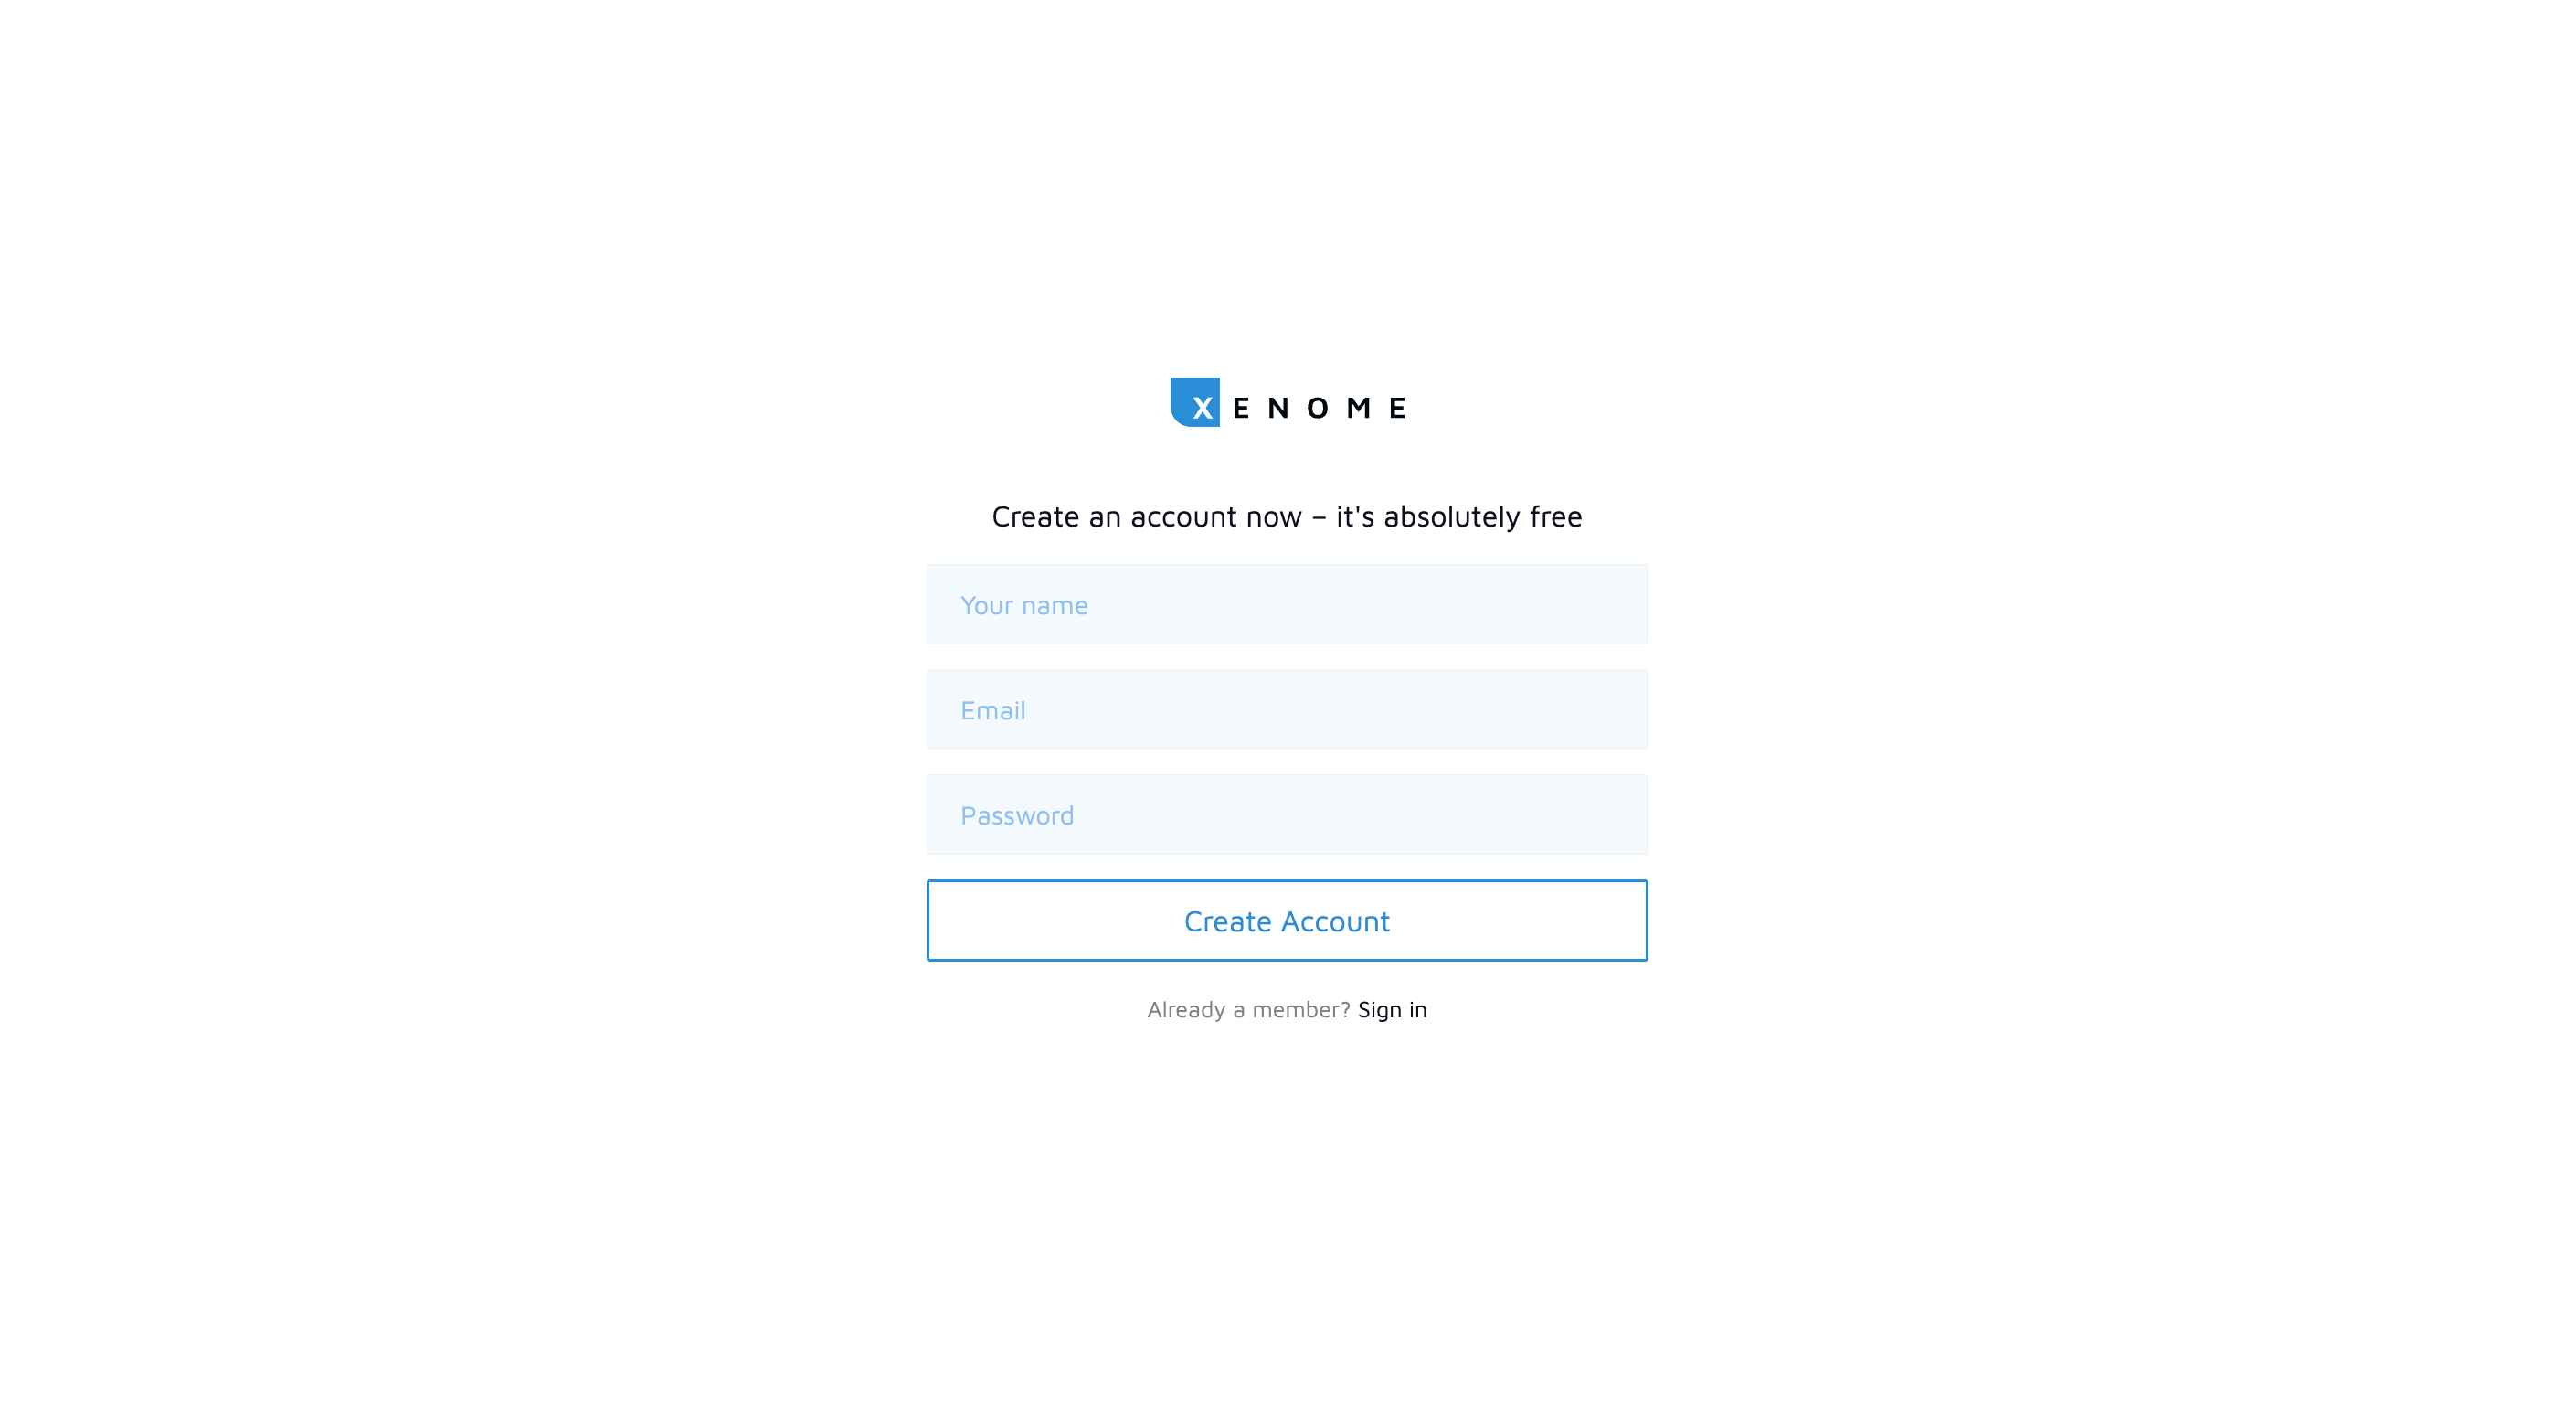 Sign in to https://xenome.app/register